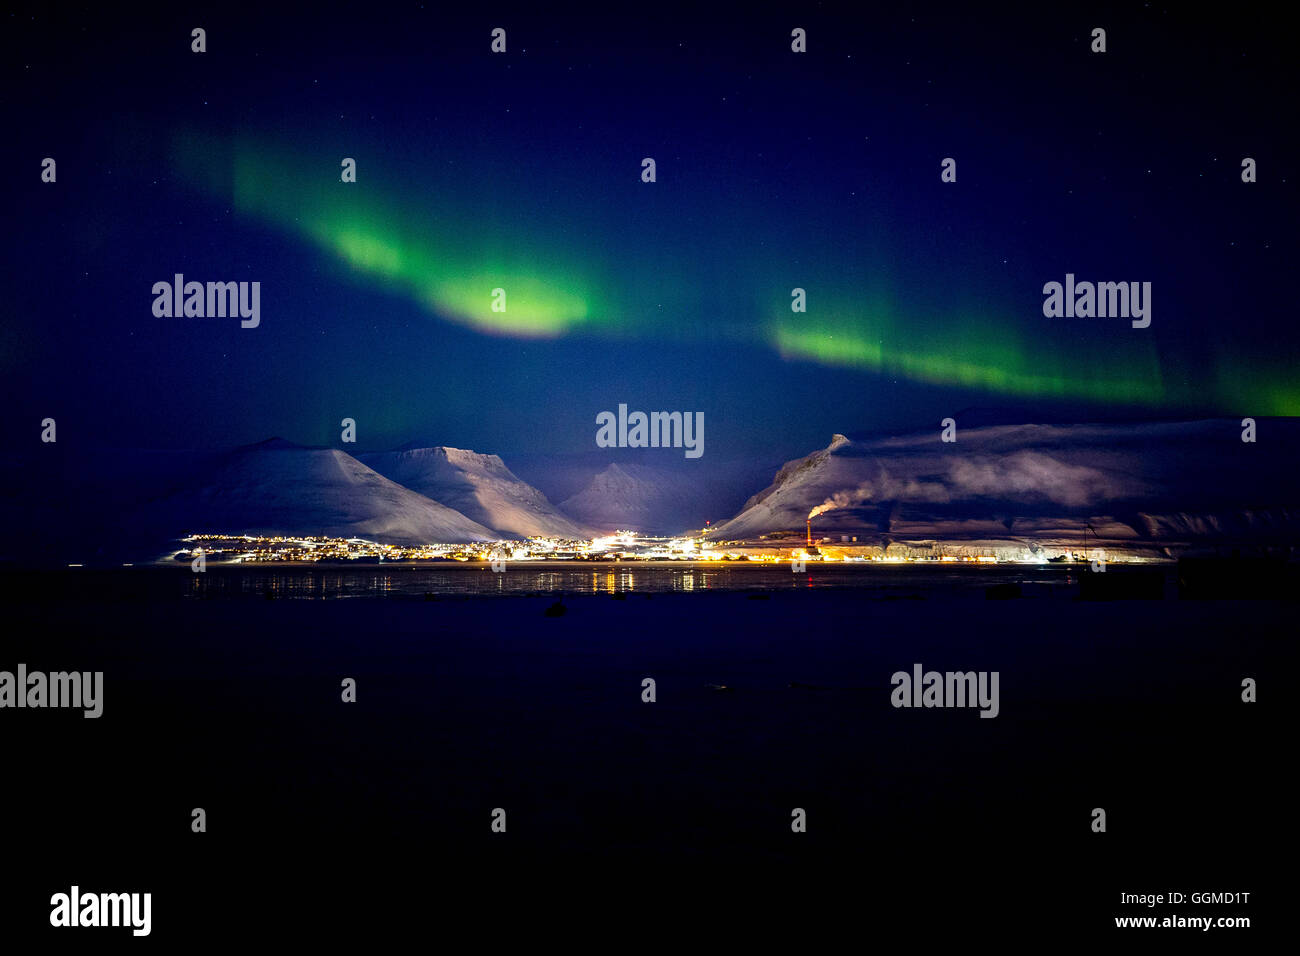 Longyearbyen Winter High Resolution Stock Photography and Images - Alamy